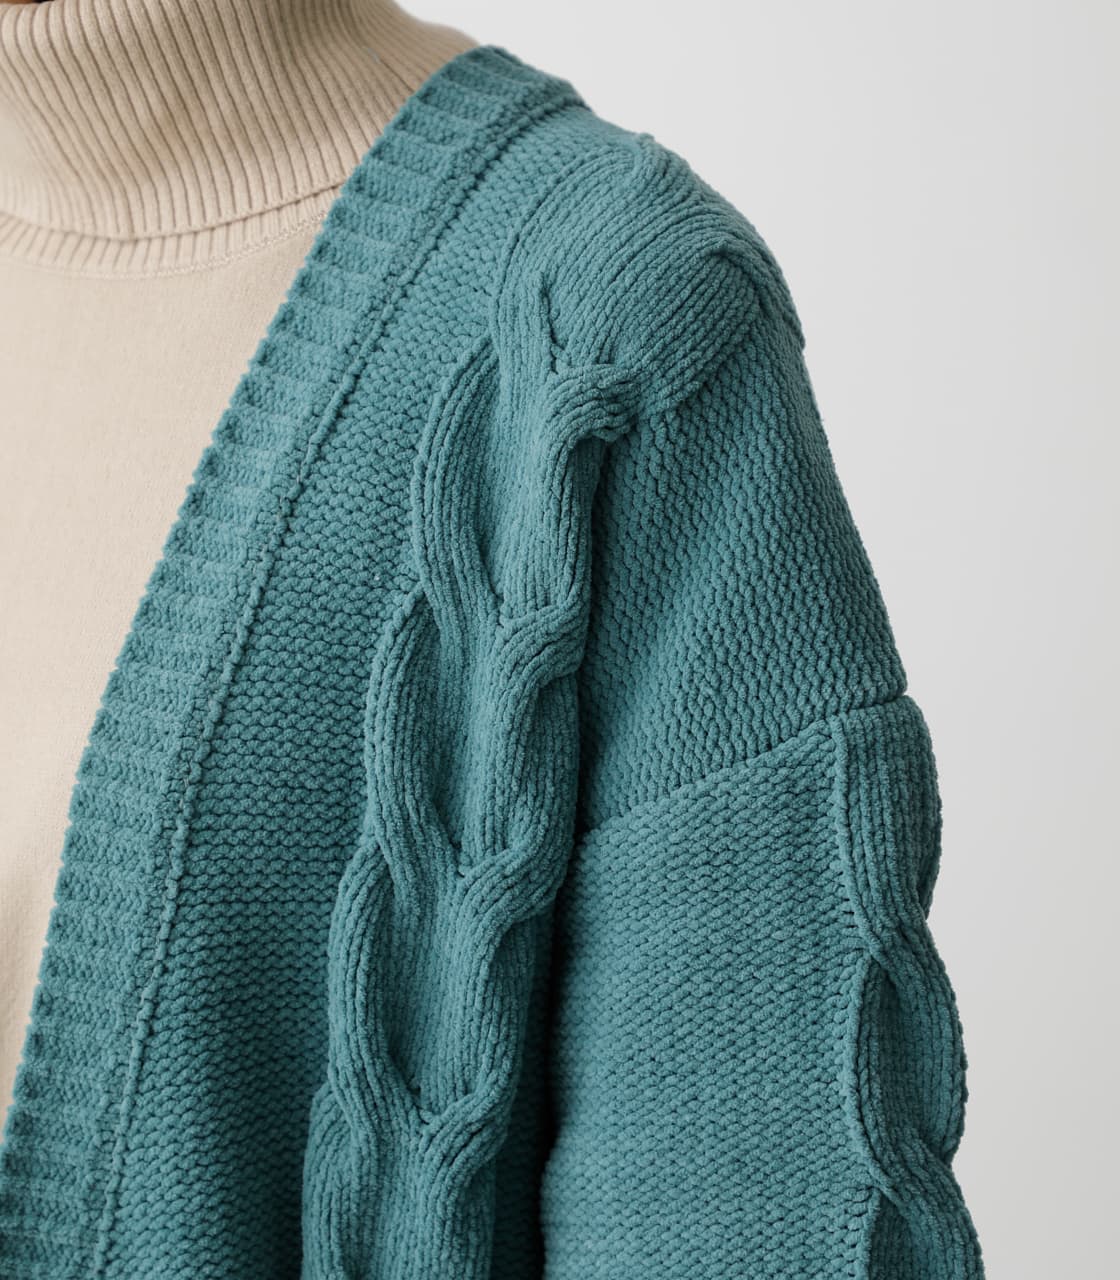 CHENILLE CABLE KNIT CARDIGAN(FREE IVOY): カーディガンバロック 